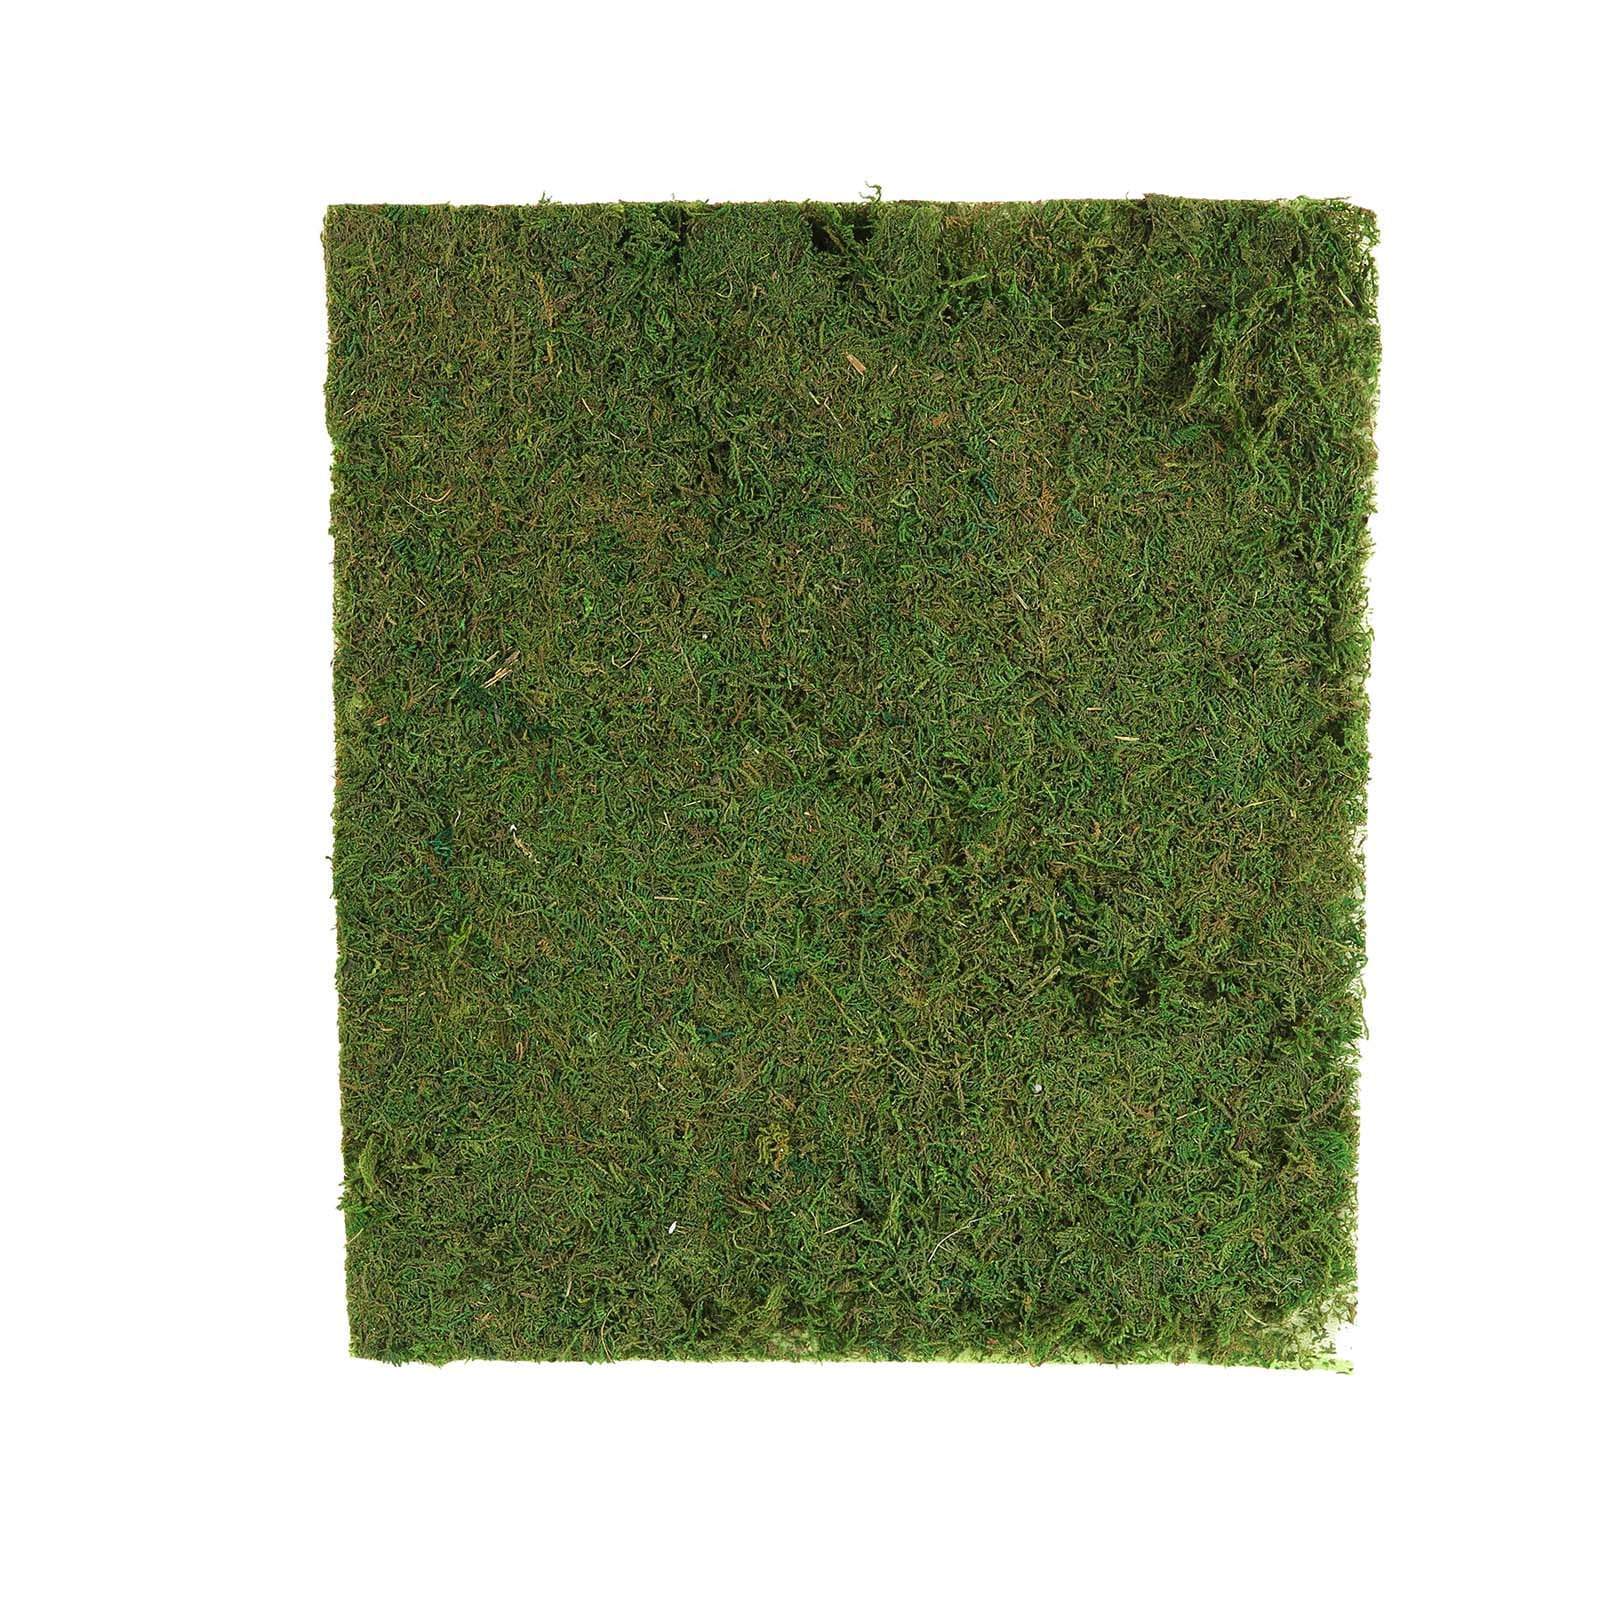 18x16 in Green Natural Preserved Moss Sheet Party Crafts Supplies